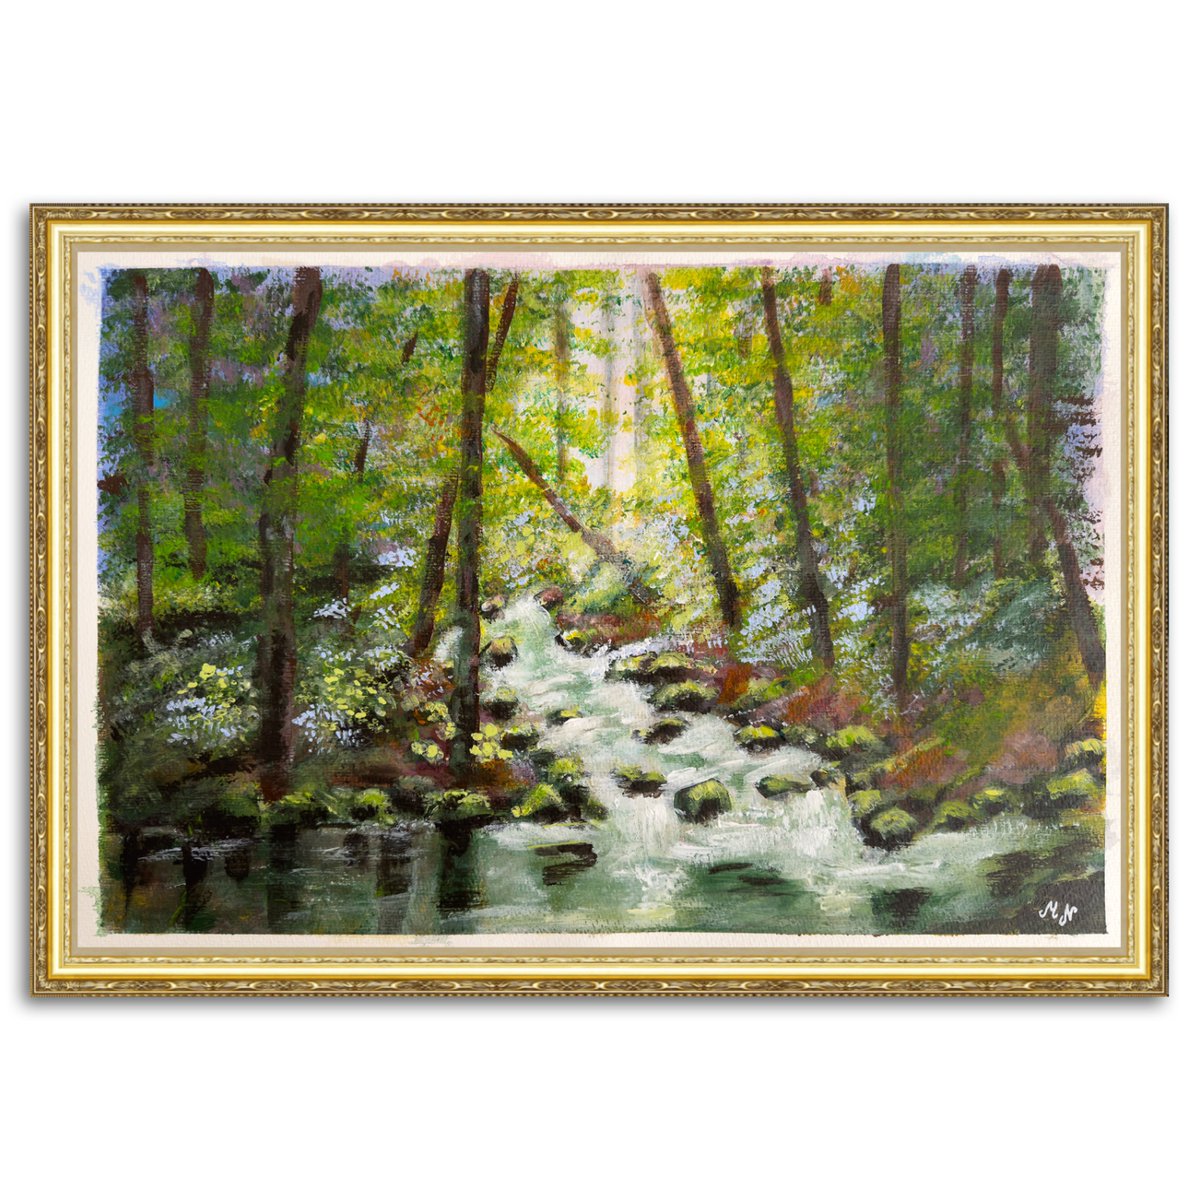 Immerse yourself in the calming allure of nature with 'The Forest Stream' artwork. Vibrant hues and dynamic strokes bring the lush forest to life. #Art #Nature #Painting #Forest #Stream artcursor.com/products/the-f…